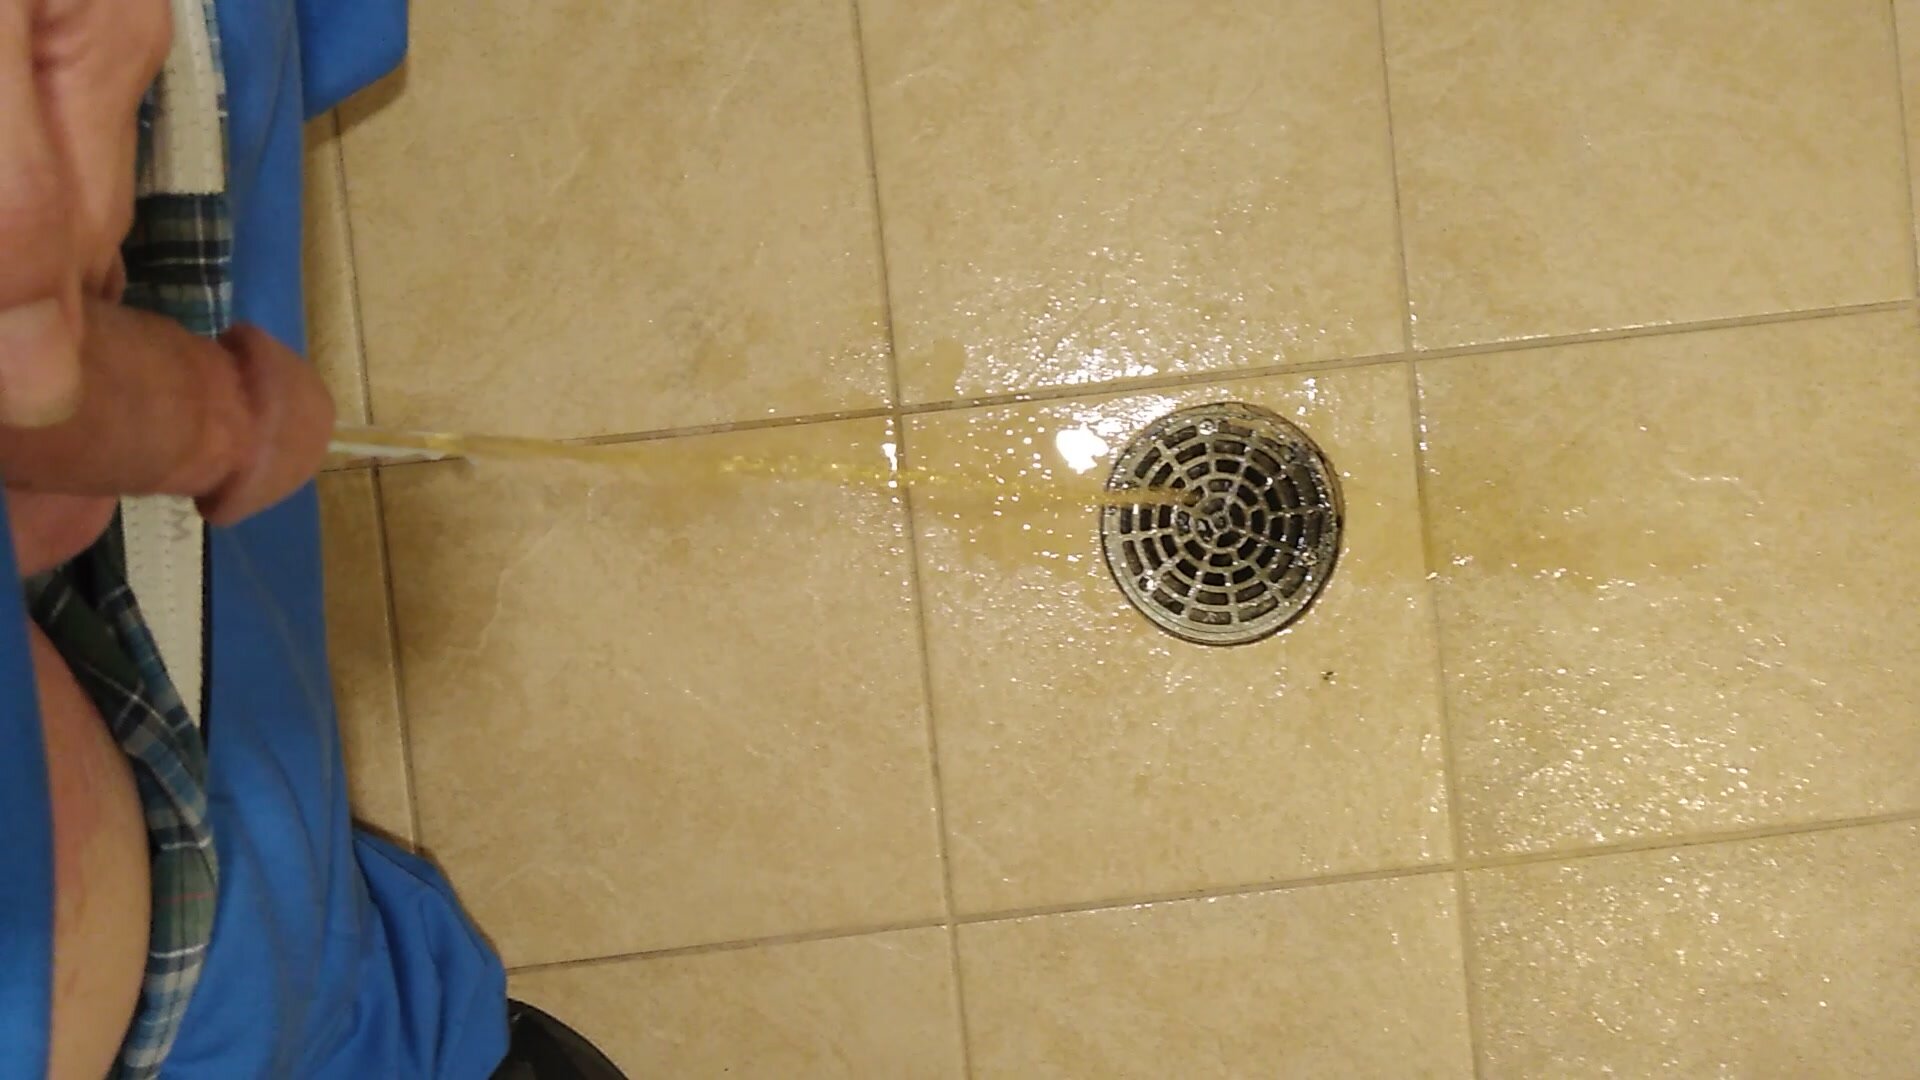 Pissing down the floor drain at work